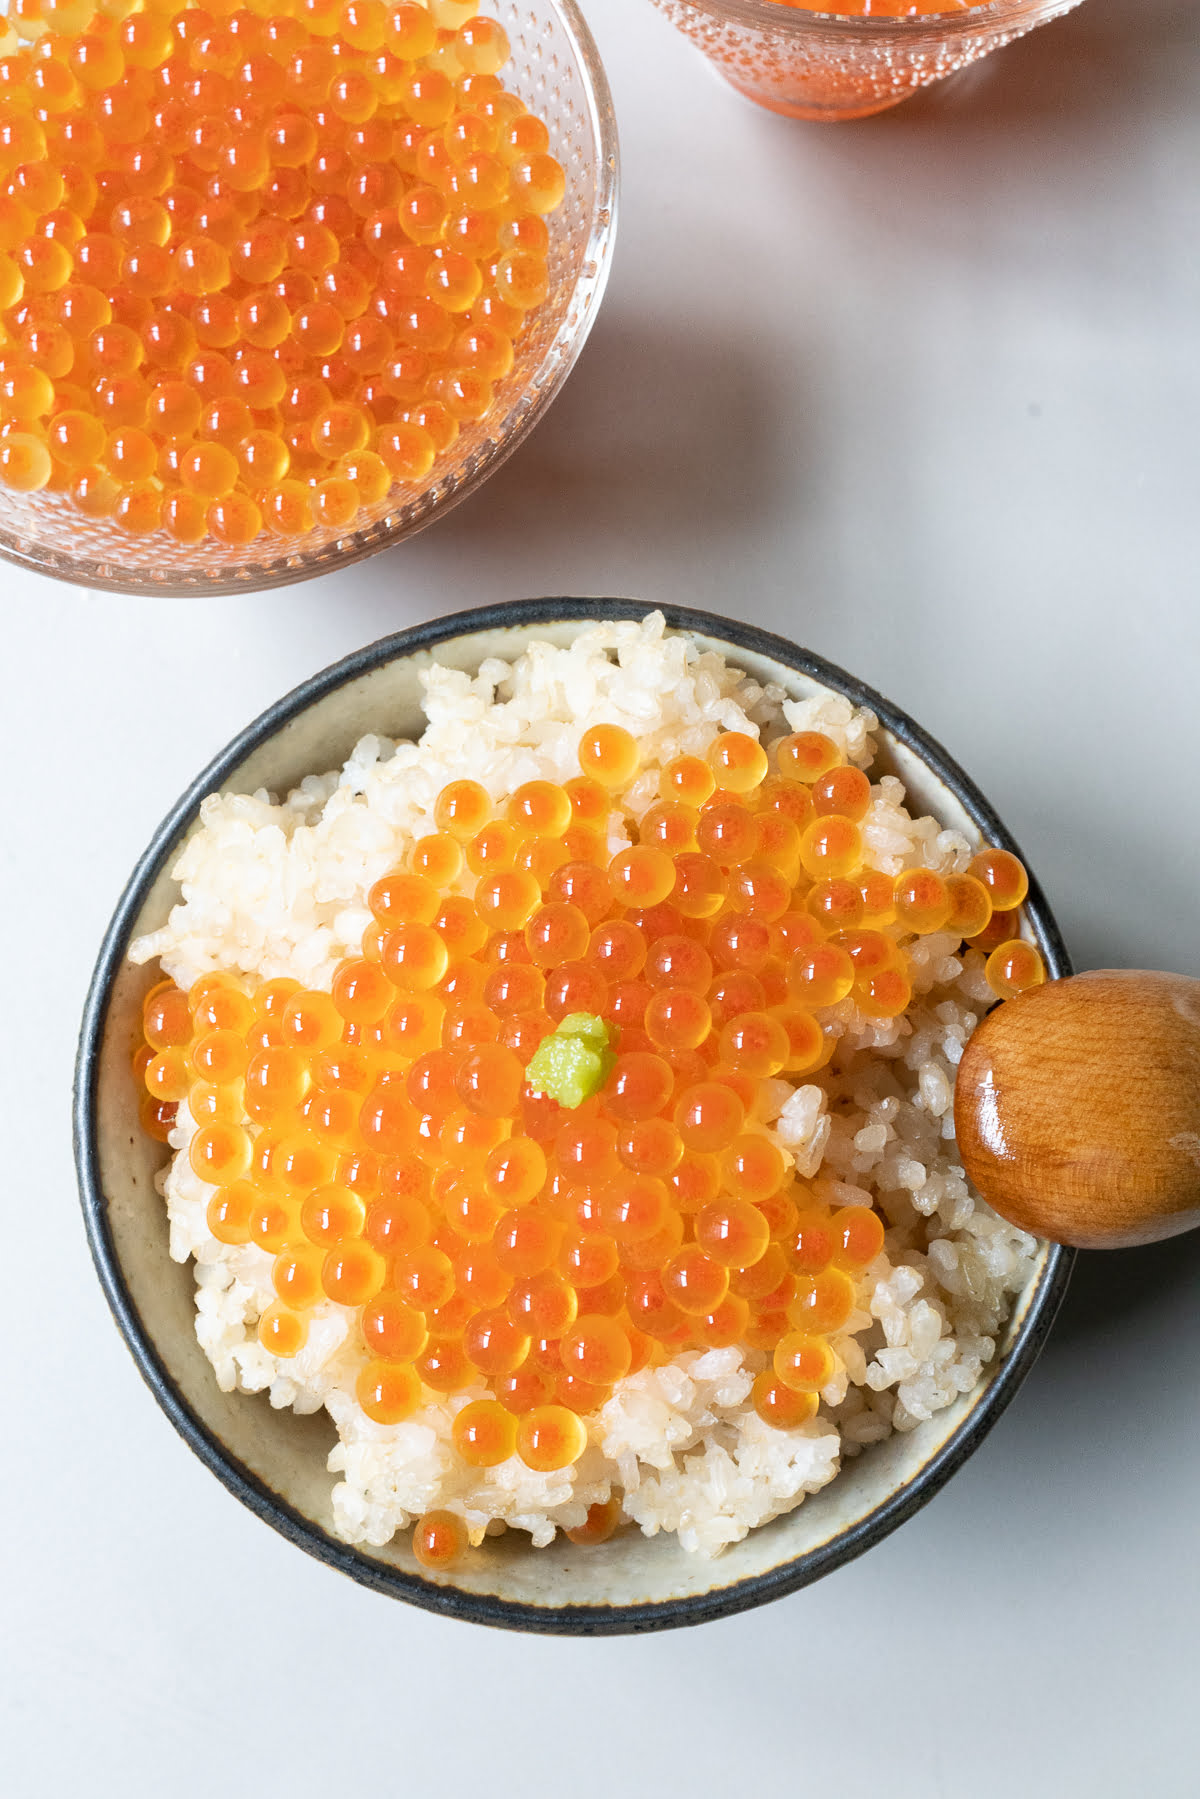 Ikura (soy sauce-cured) salmon roe over a bowl of rice with wasabi